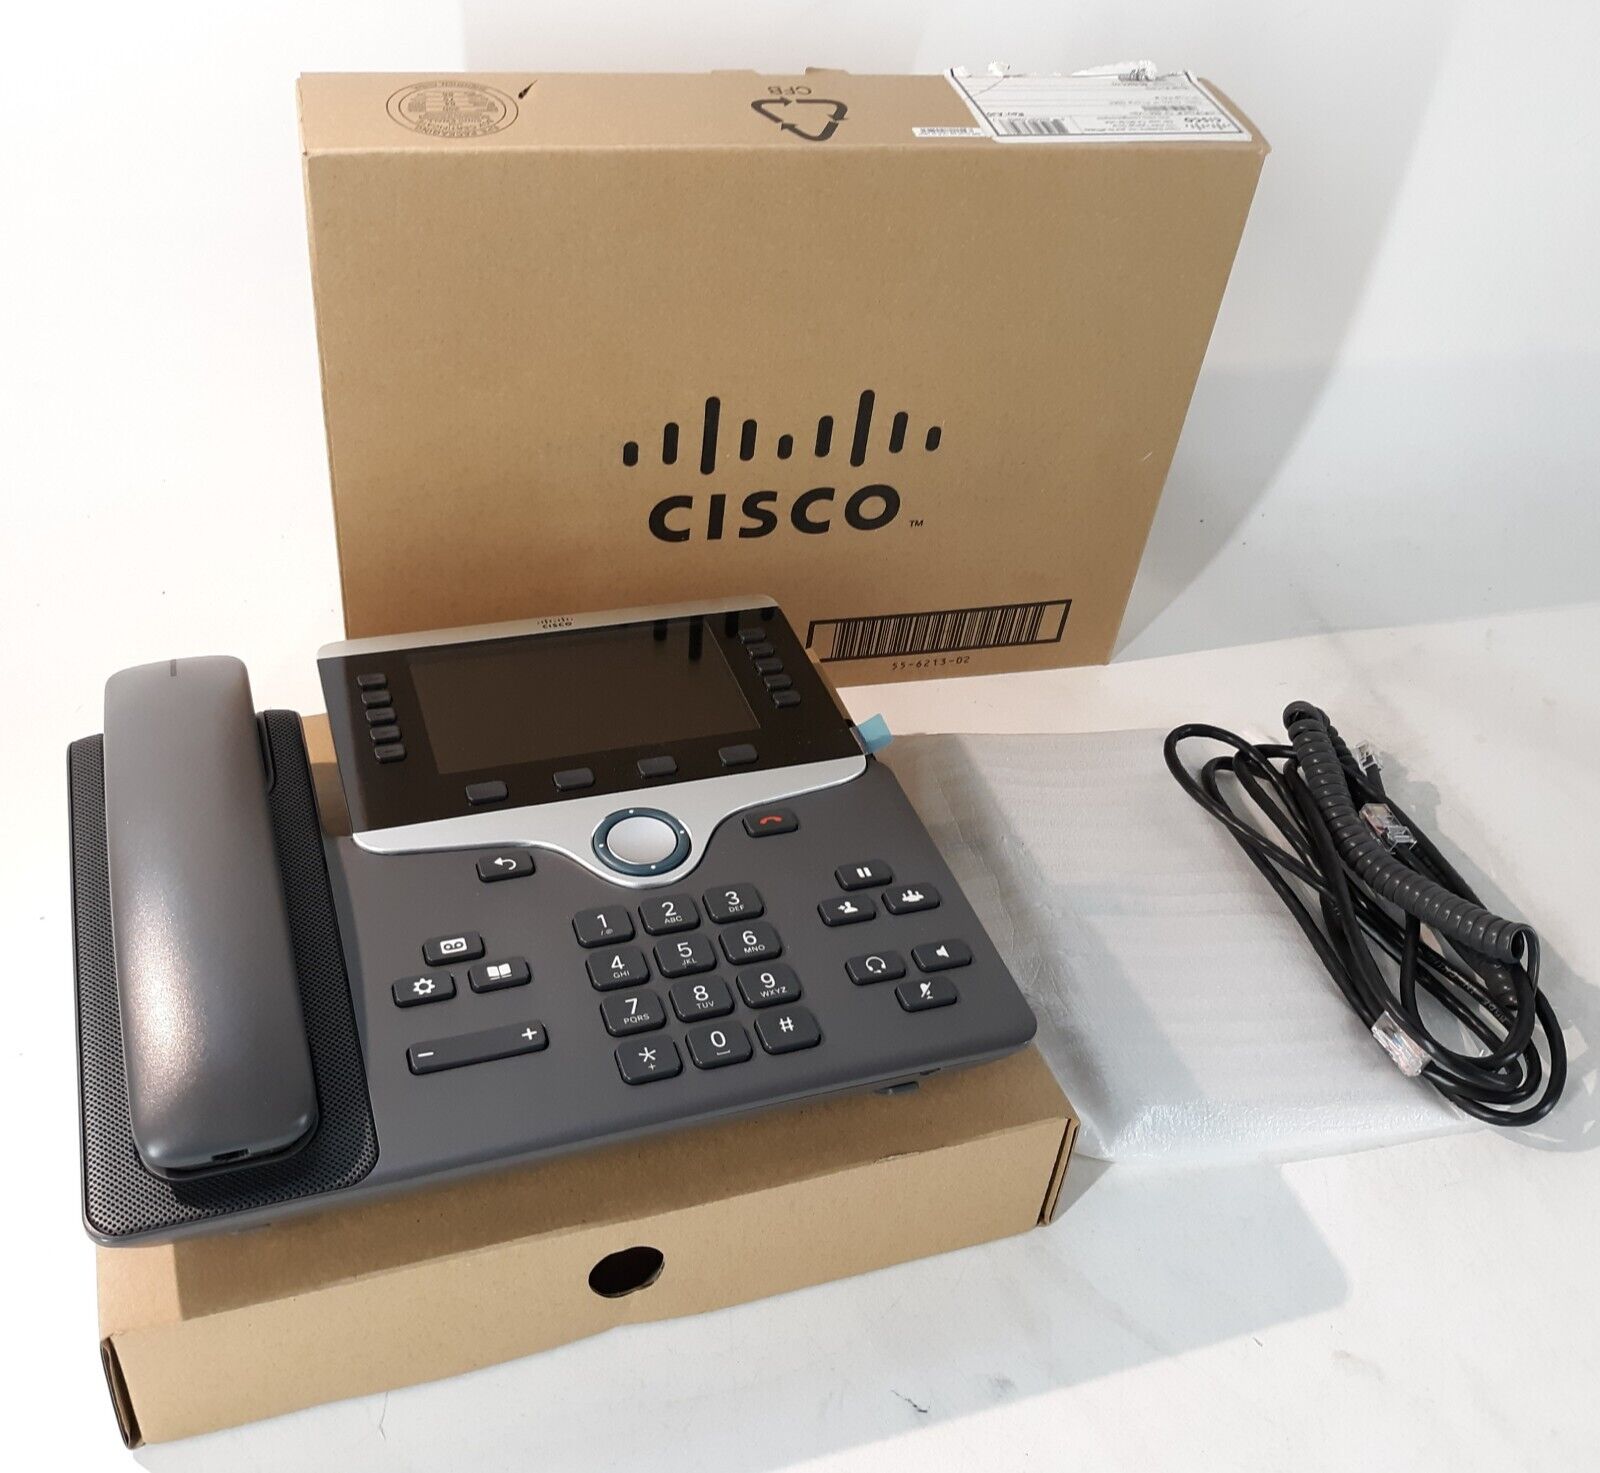 Cisco CP-8861-K9 VoIP Corded Phone Stand Network Cable Headset Cord